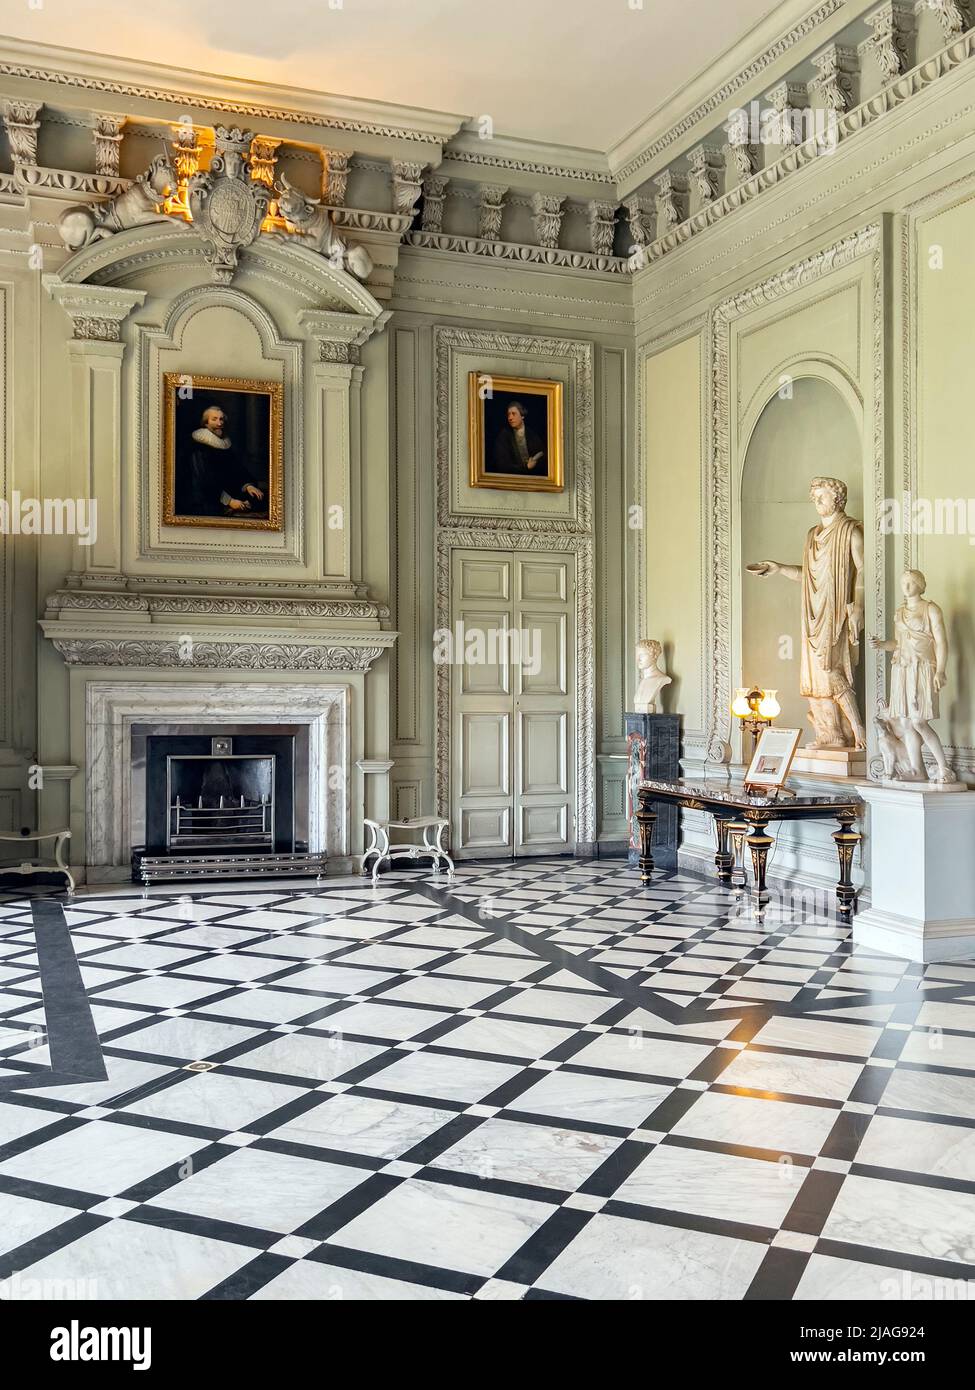 The Marble Hall at Petworth House in West Sussex, United Kingdom.  Petworth is a late 17th-century Grade I listed country house, rebuilt in 1688 by Ch Stock Photo